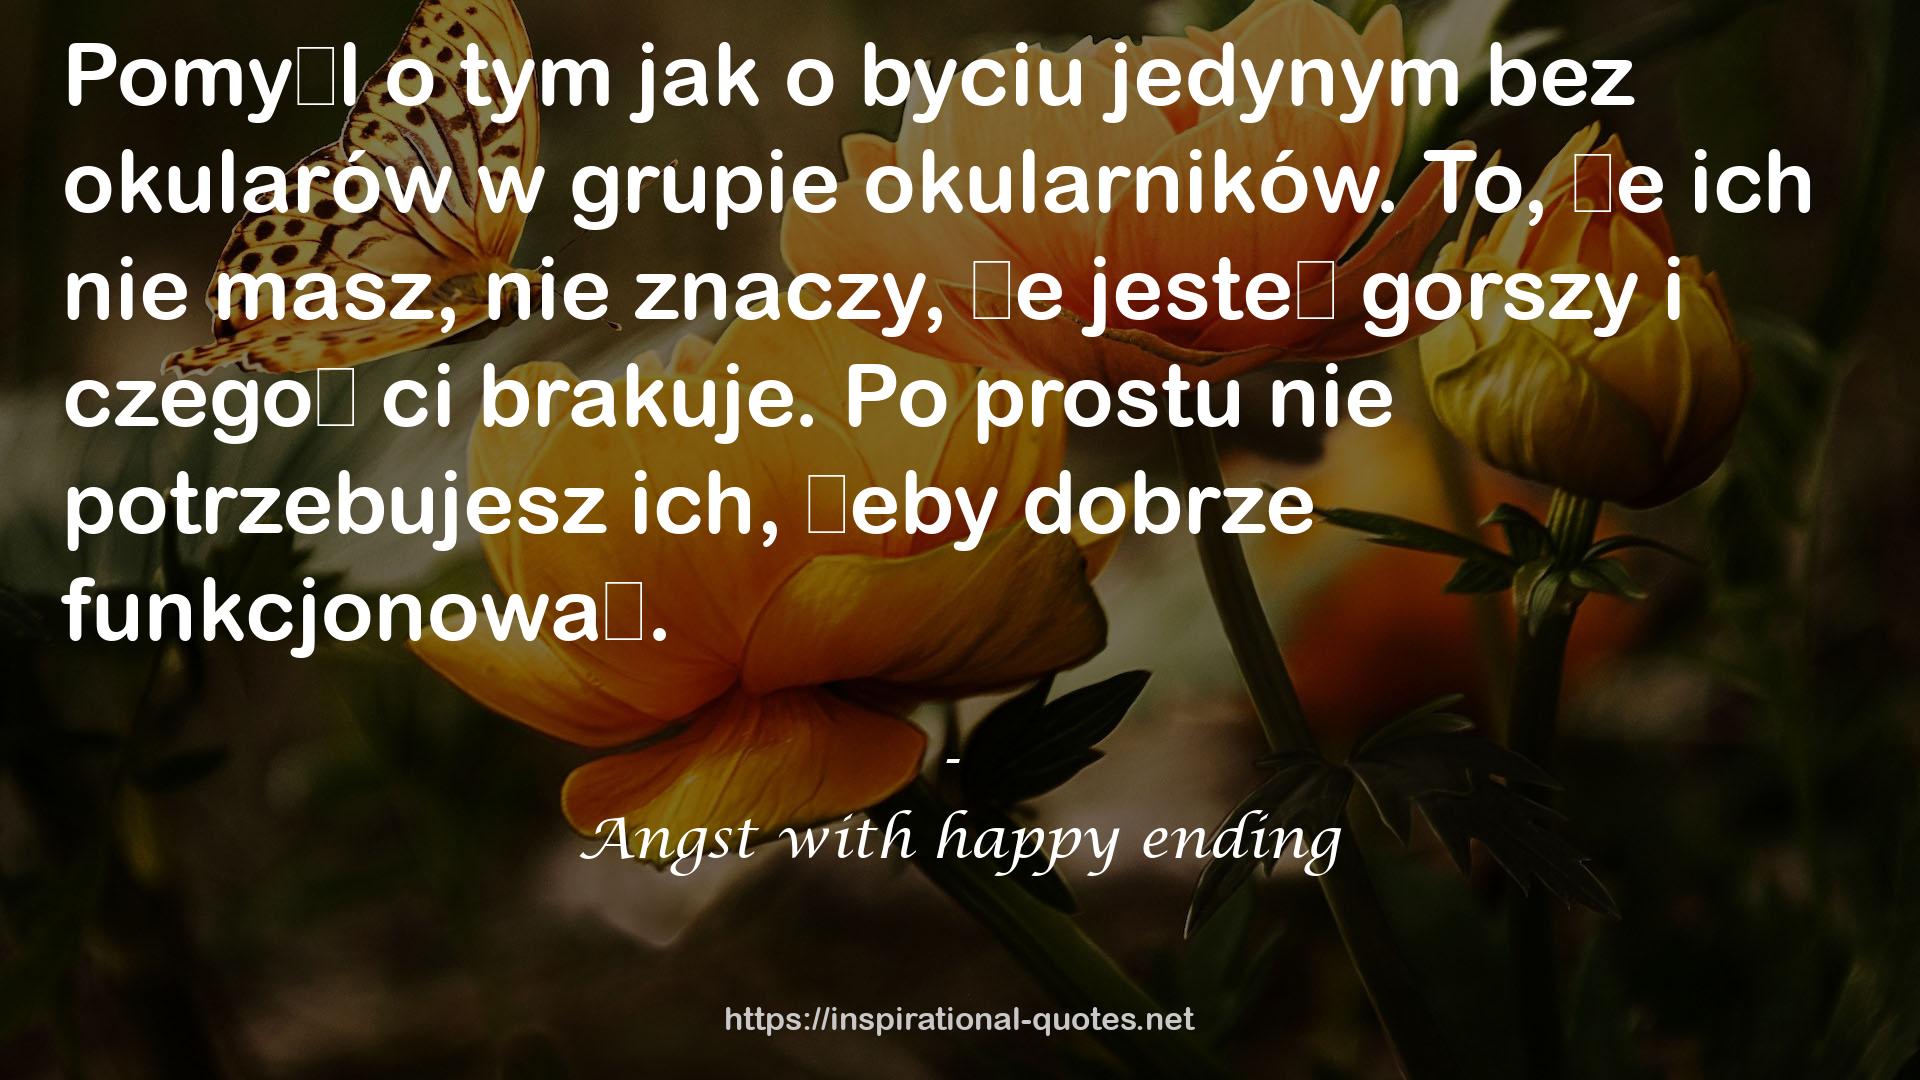 Angst with happy ending QUOTES